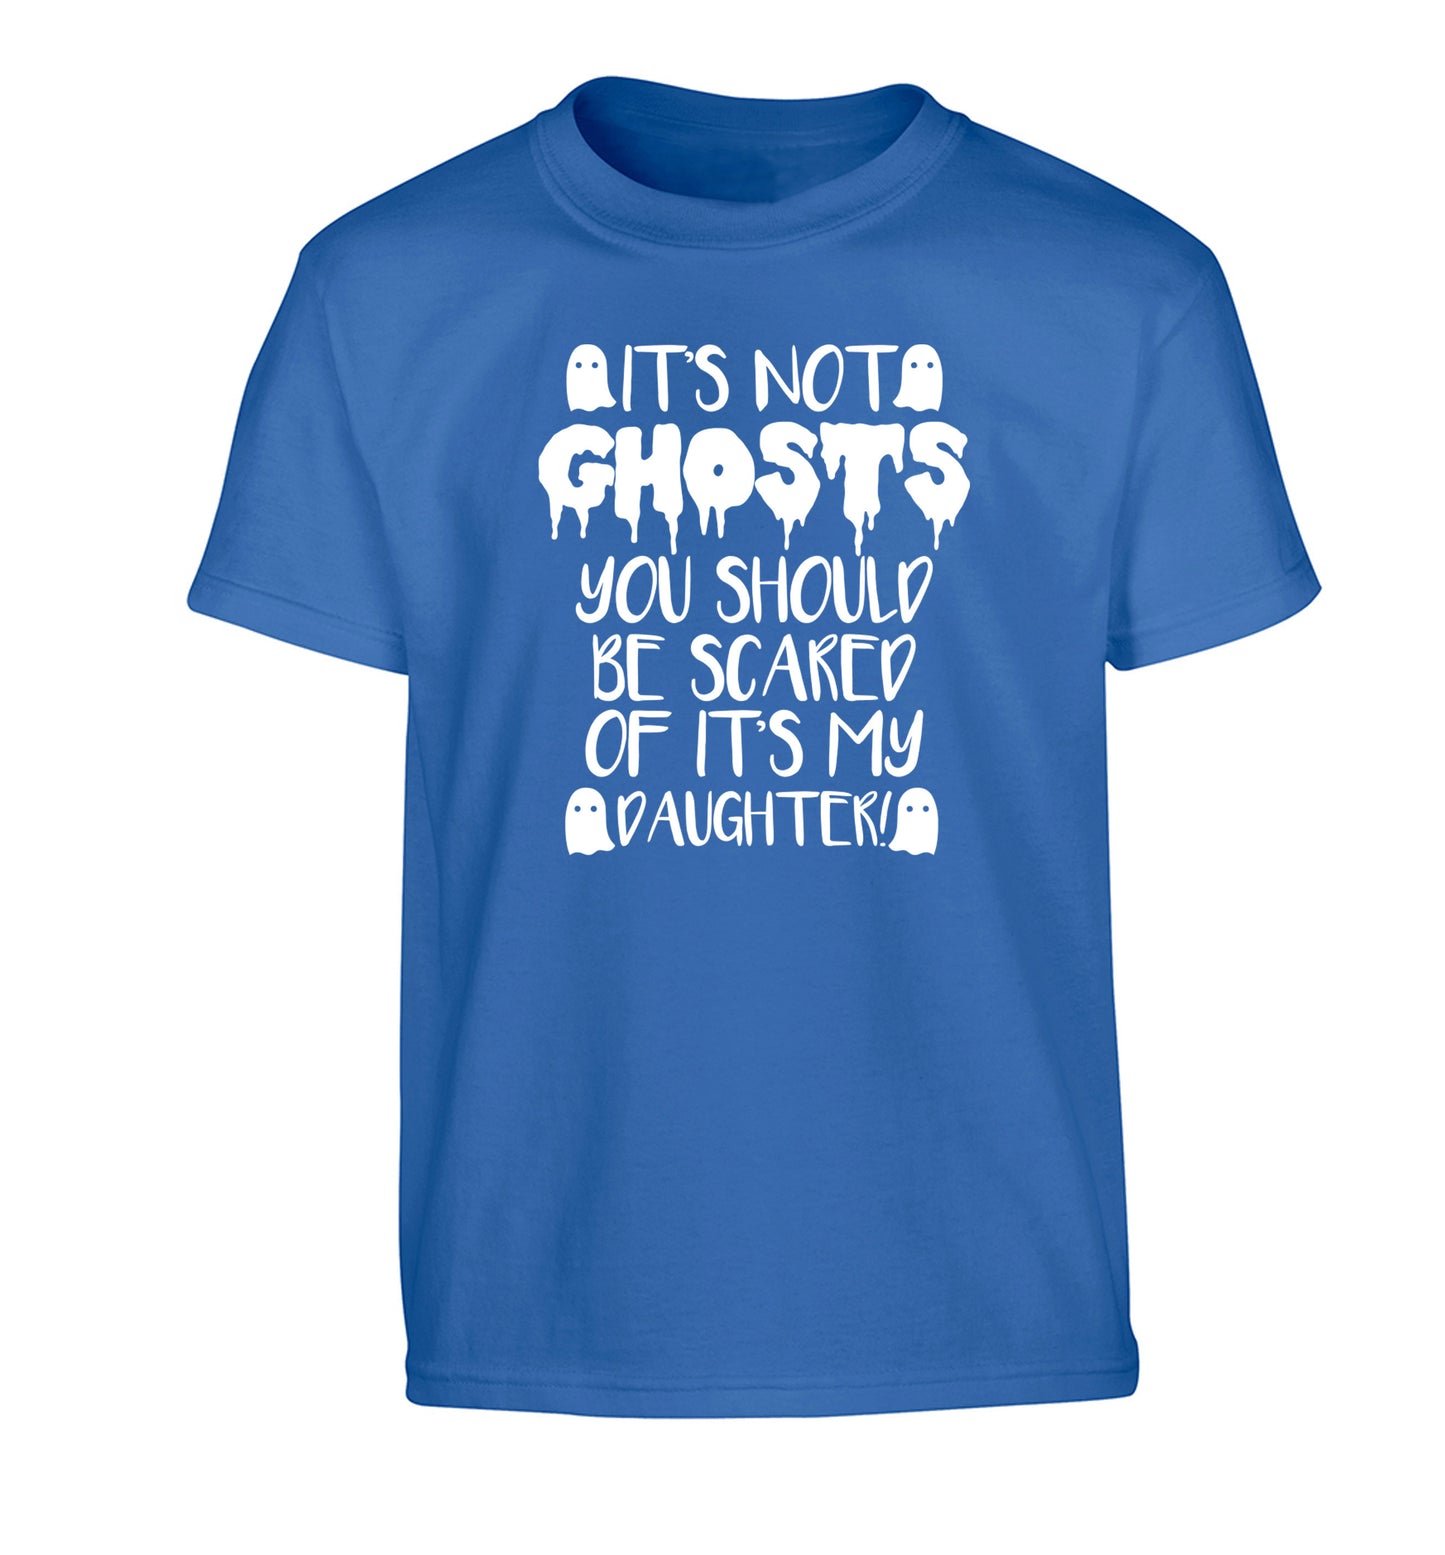 It's not ghosts you should be scared of it's my daughter! Children's blue Tshirt 12-14 Years